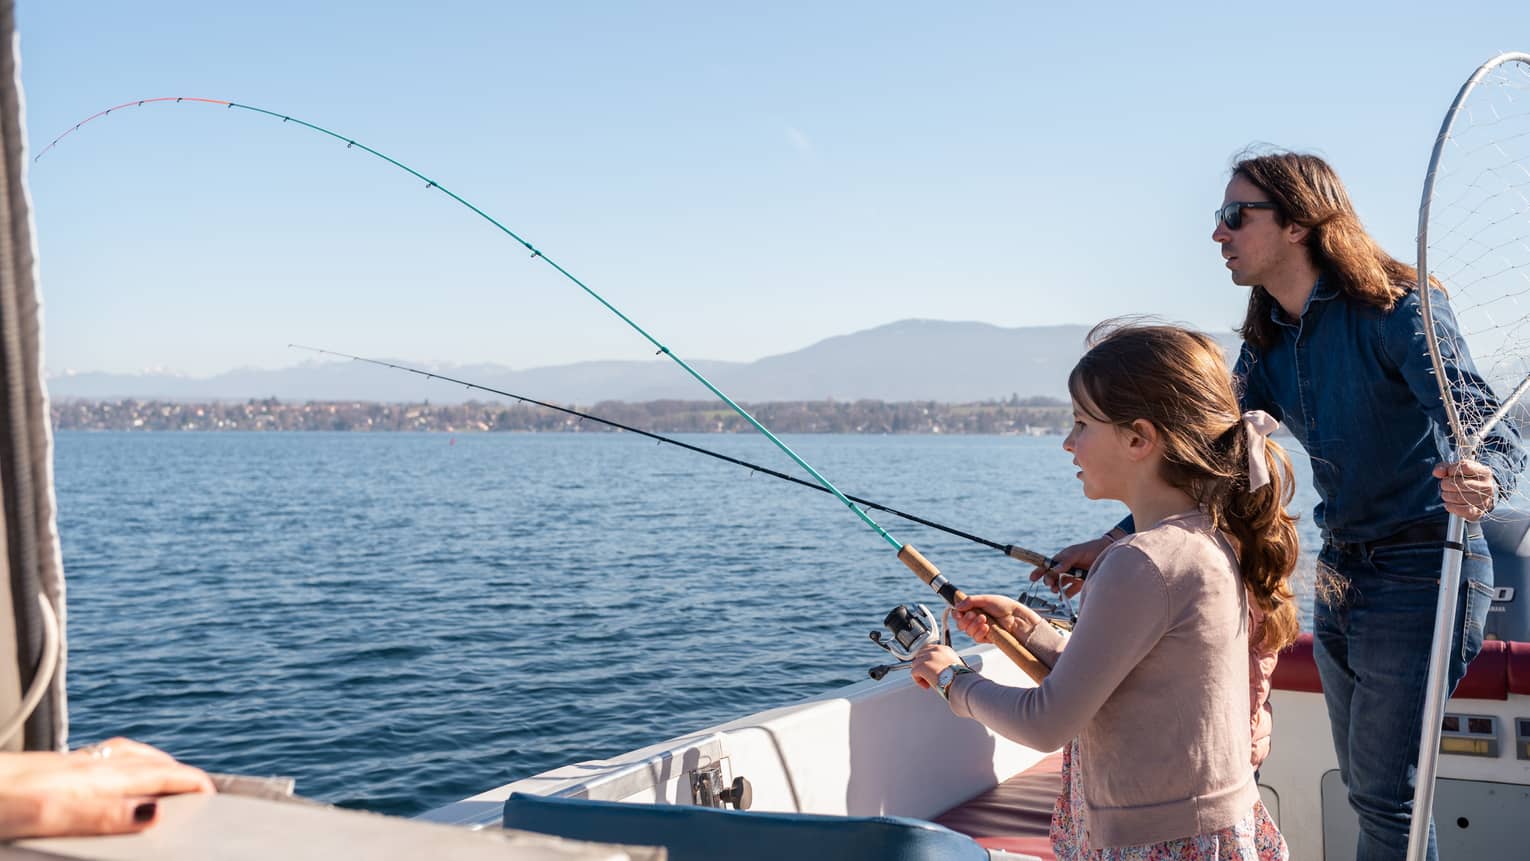 Man holding net and fishing rod, and girl standing in boat, holding fishing rod